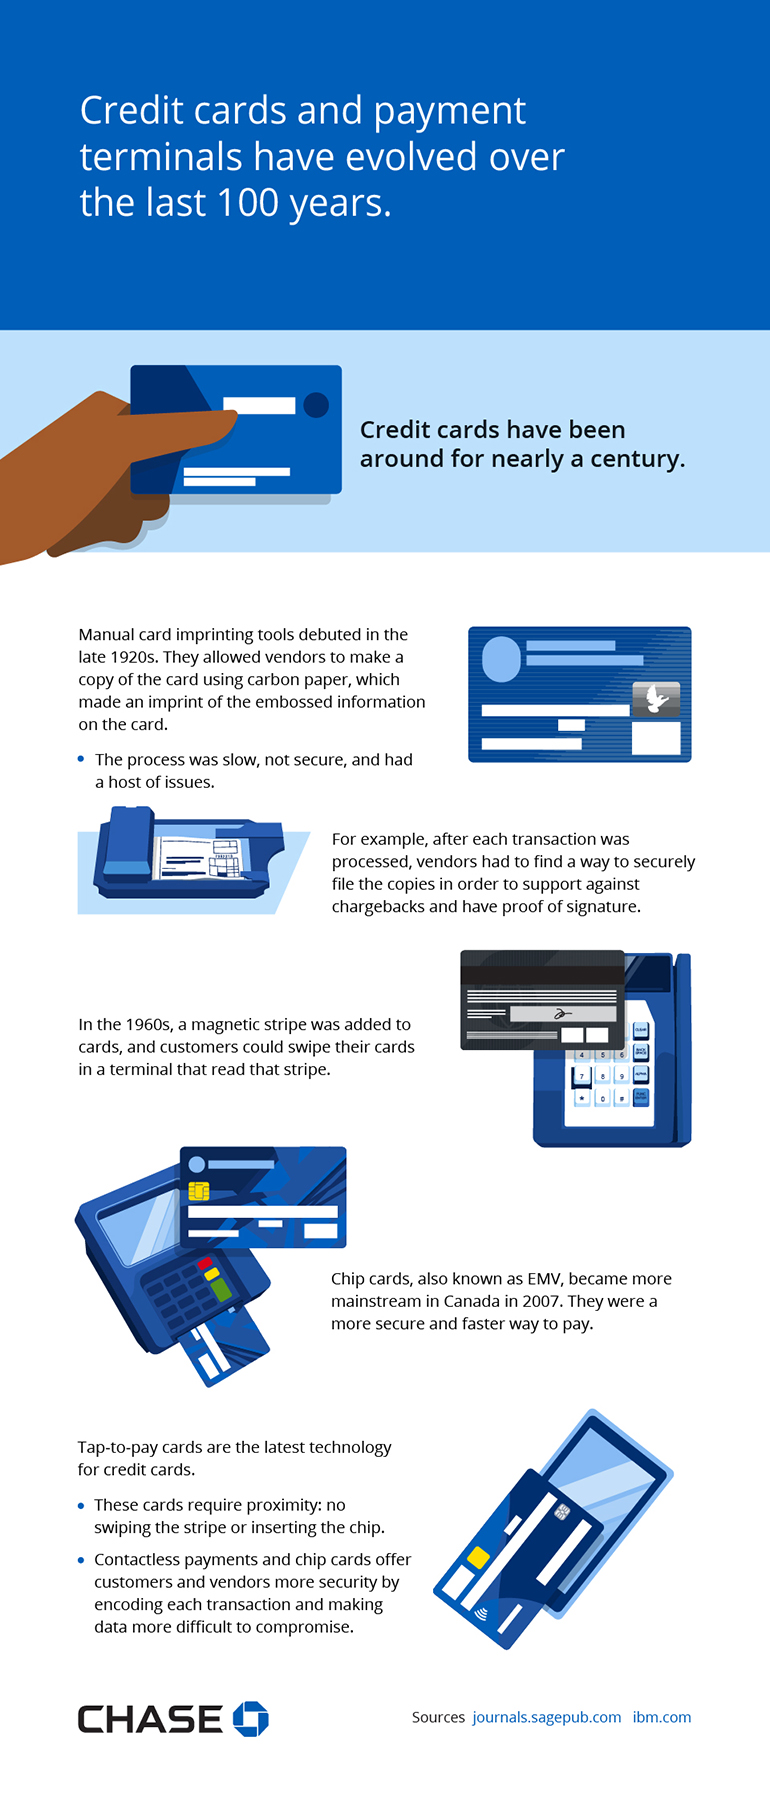 Credit cards and payment terminals have evolved over the last 100 years.